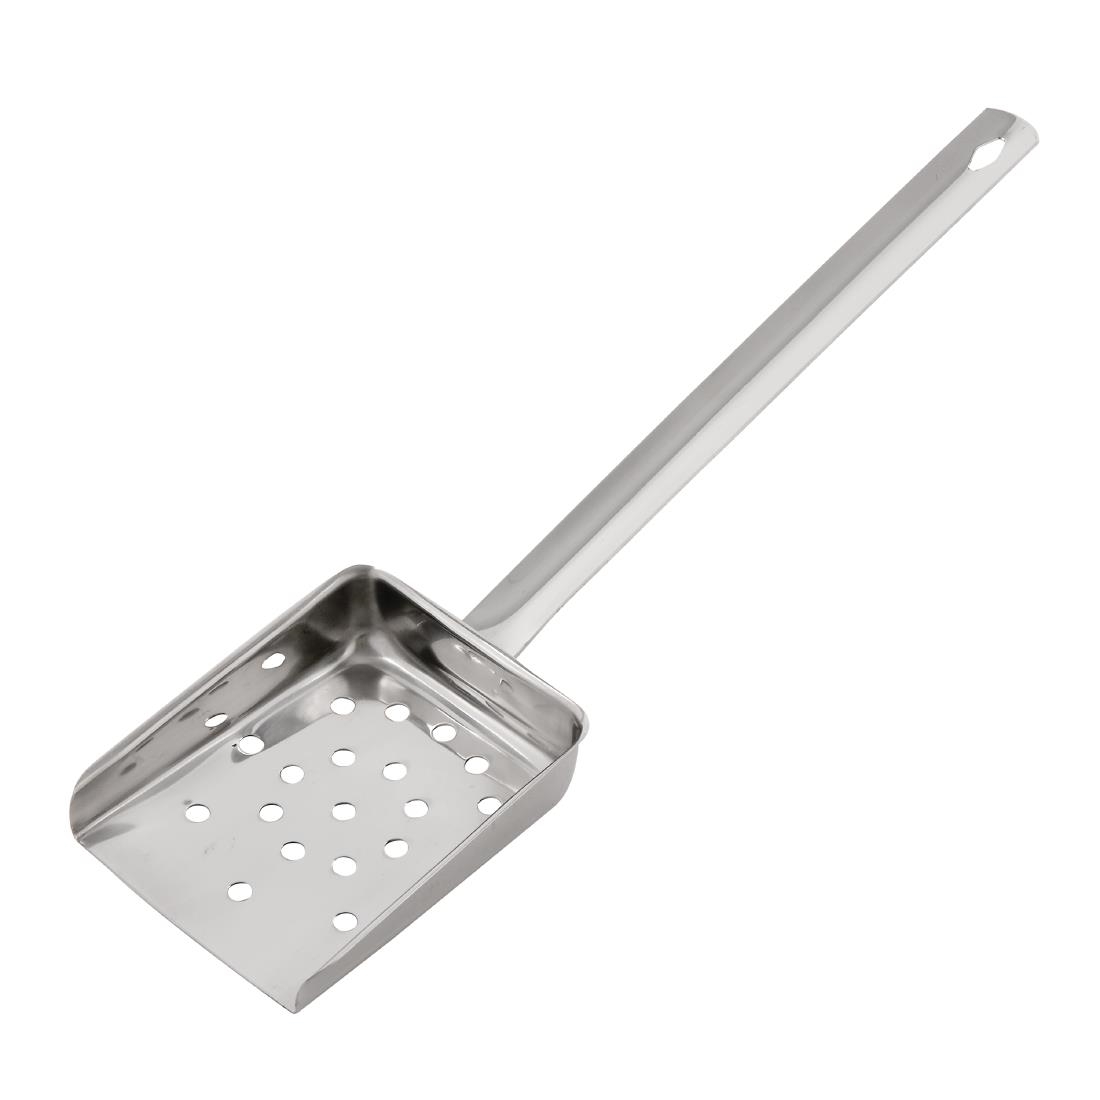 Vogue J611 Flat Handled Perforated Chip Scoops - Pack of 2